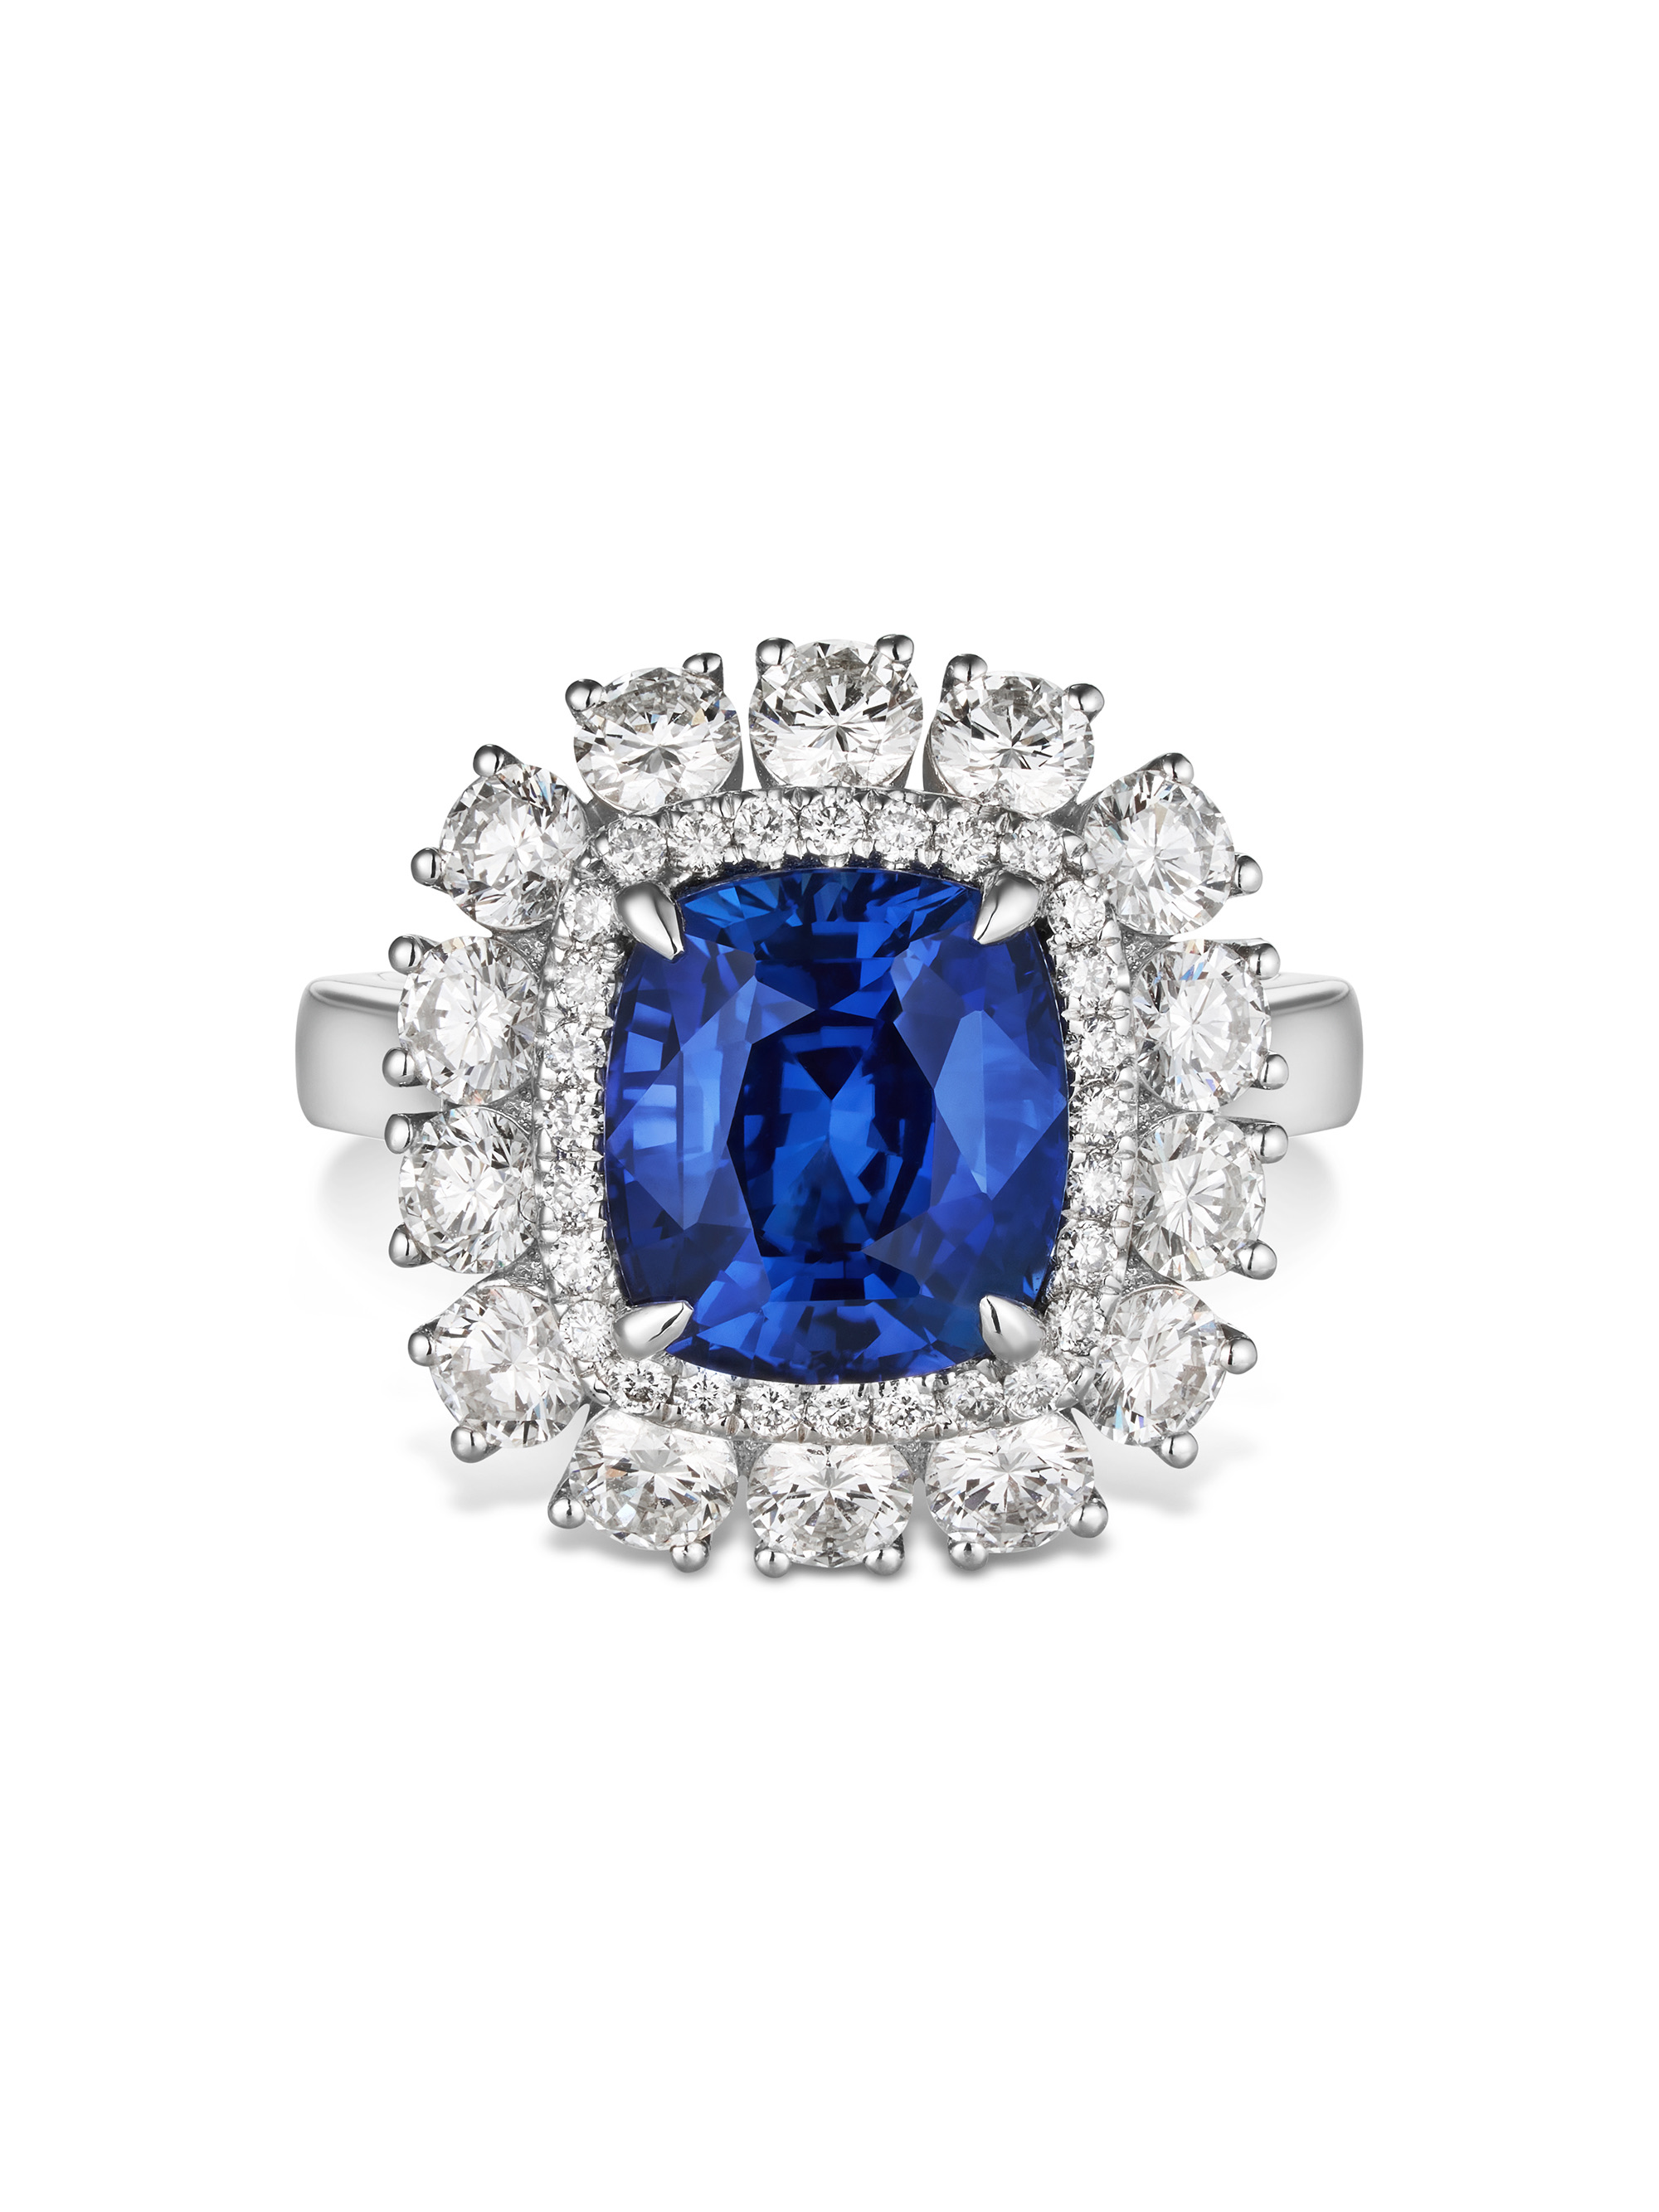 The Transformative Royal Blue Sapphire Ring